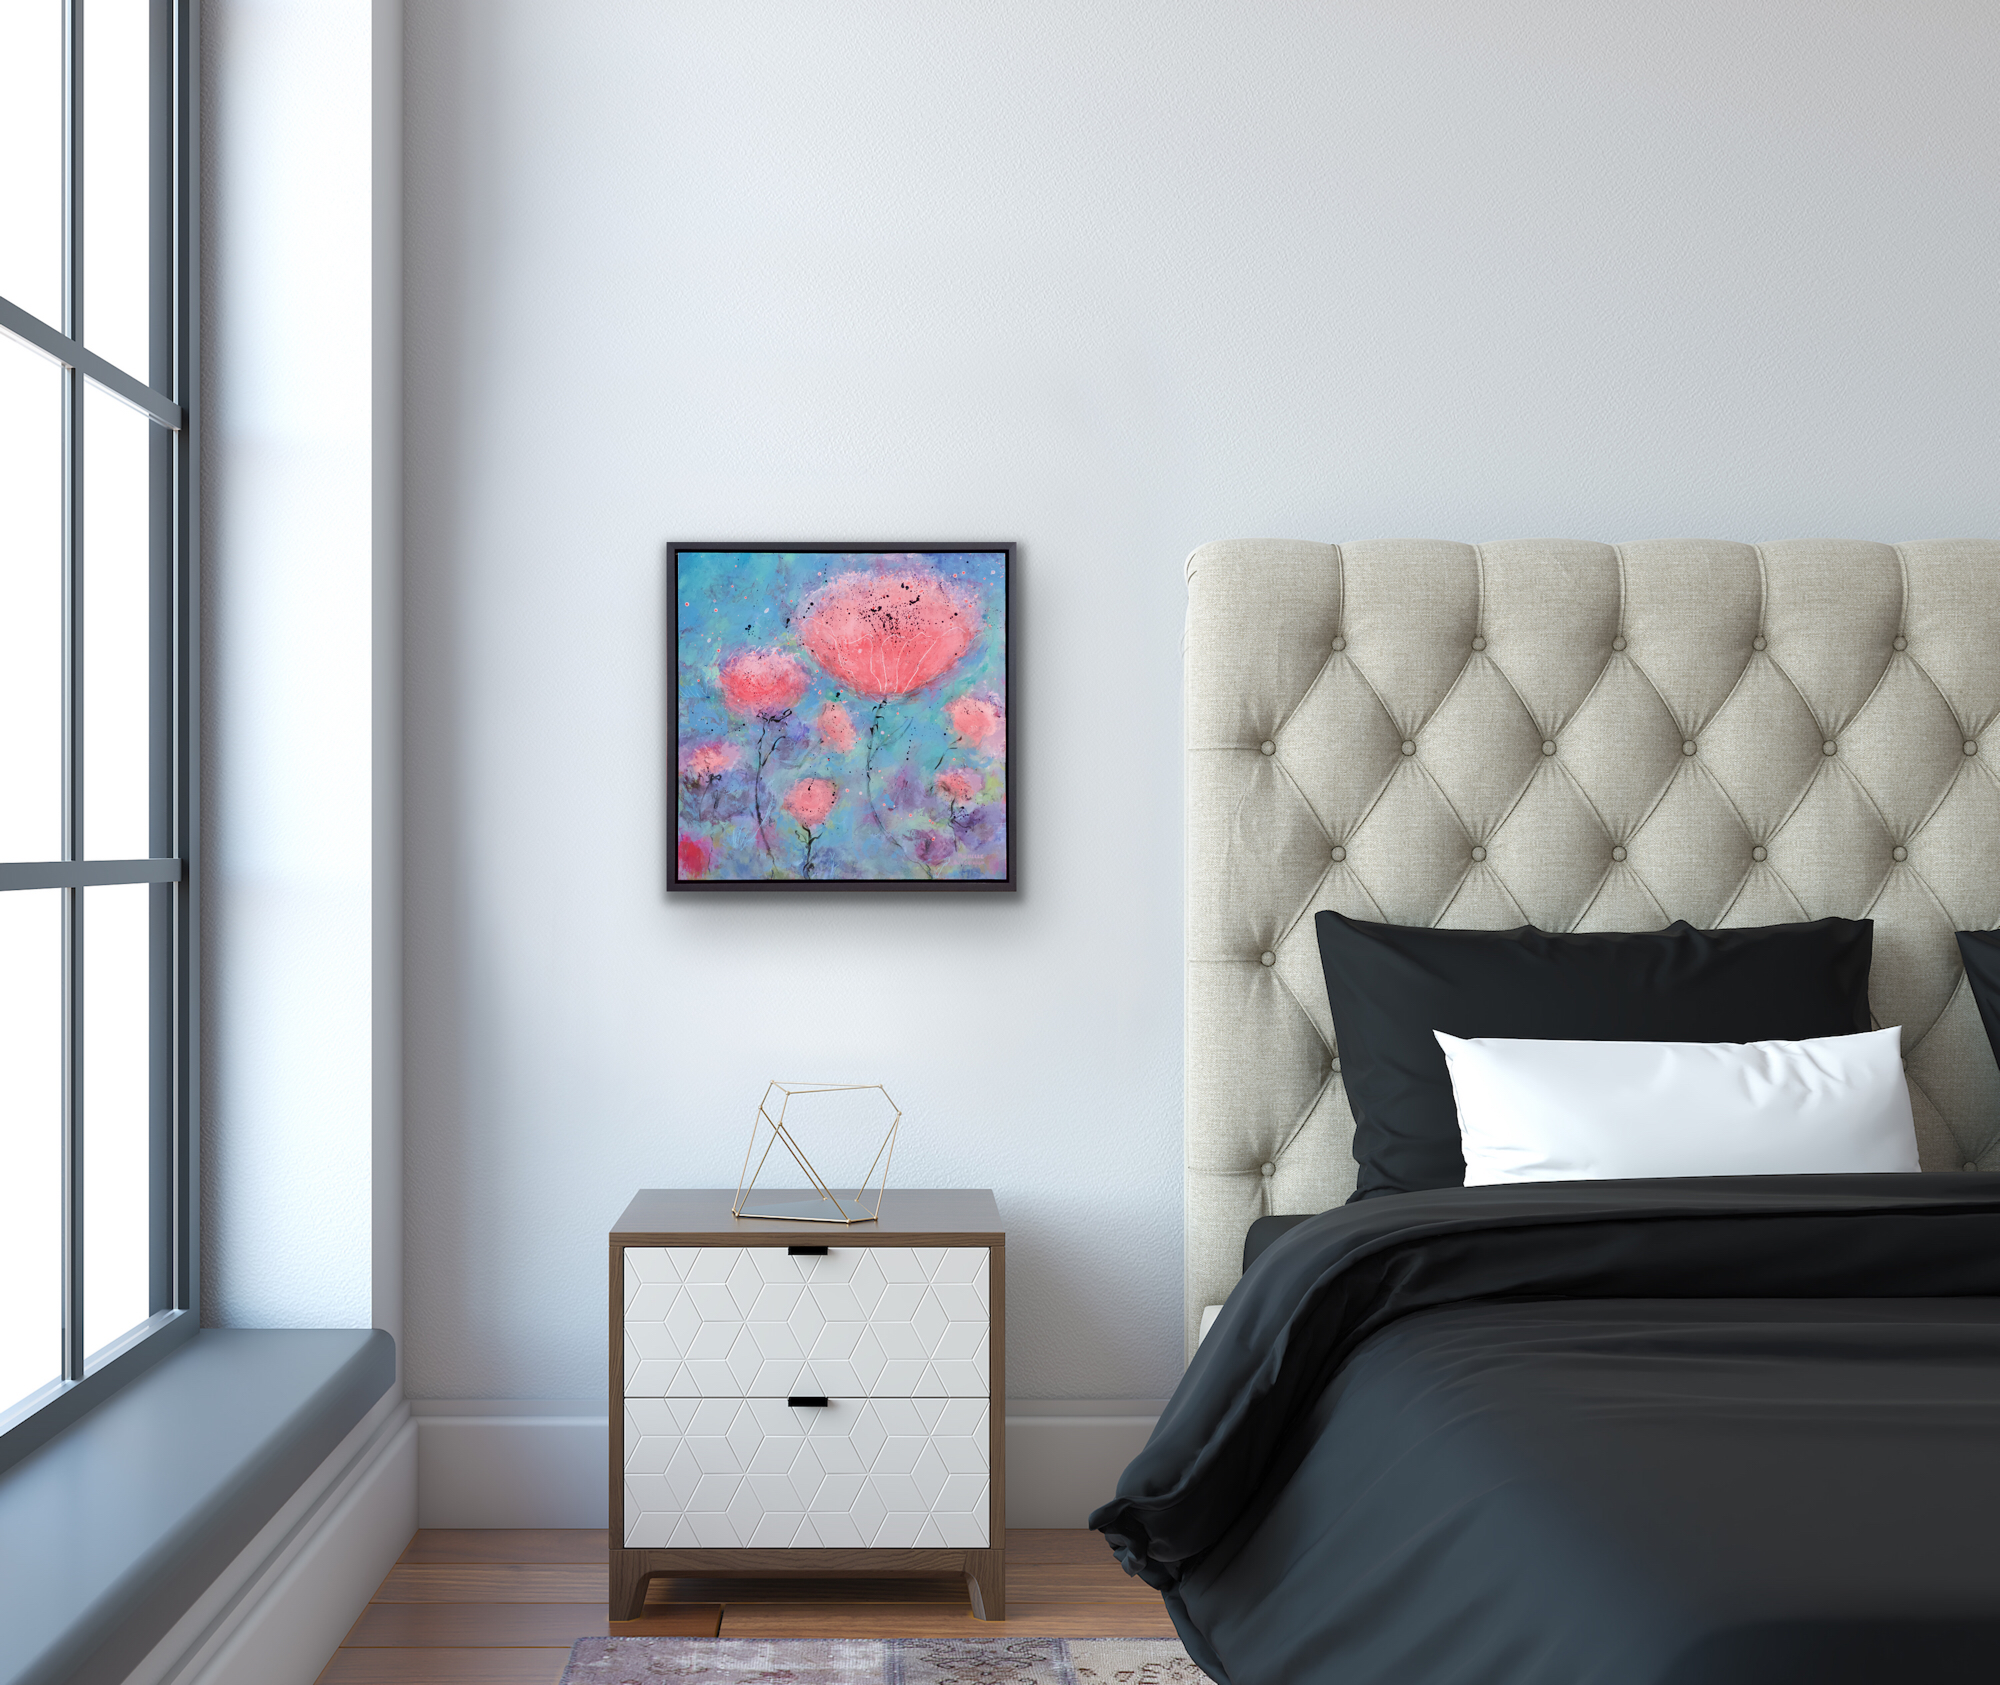 Original painting shown in a bedroom on a dove grey wall